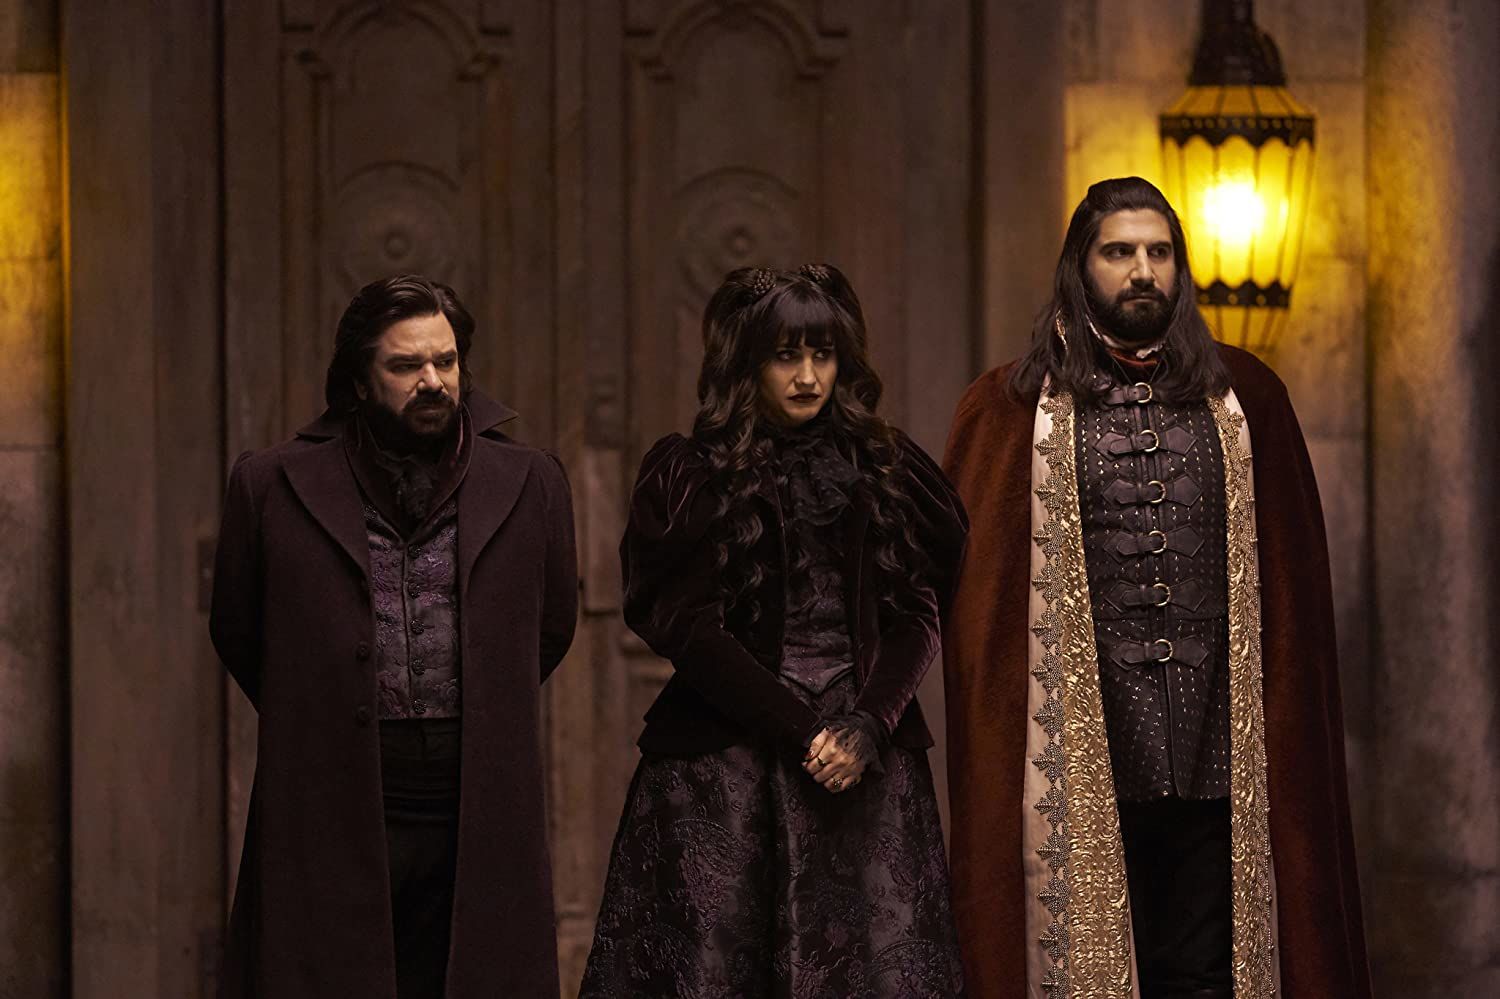 What We Do in the Shadows S3 promises twists, return faces, & Jackie